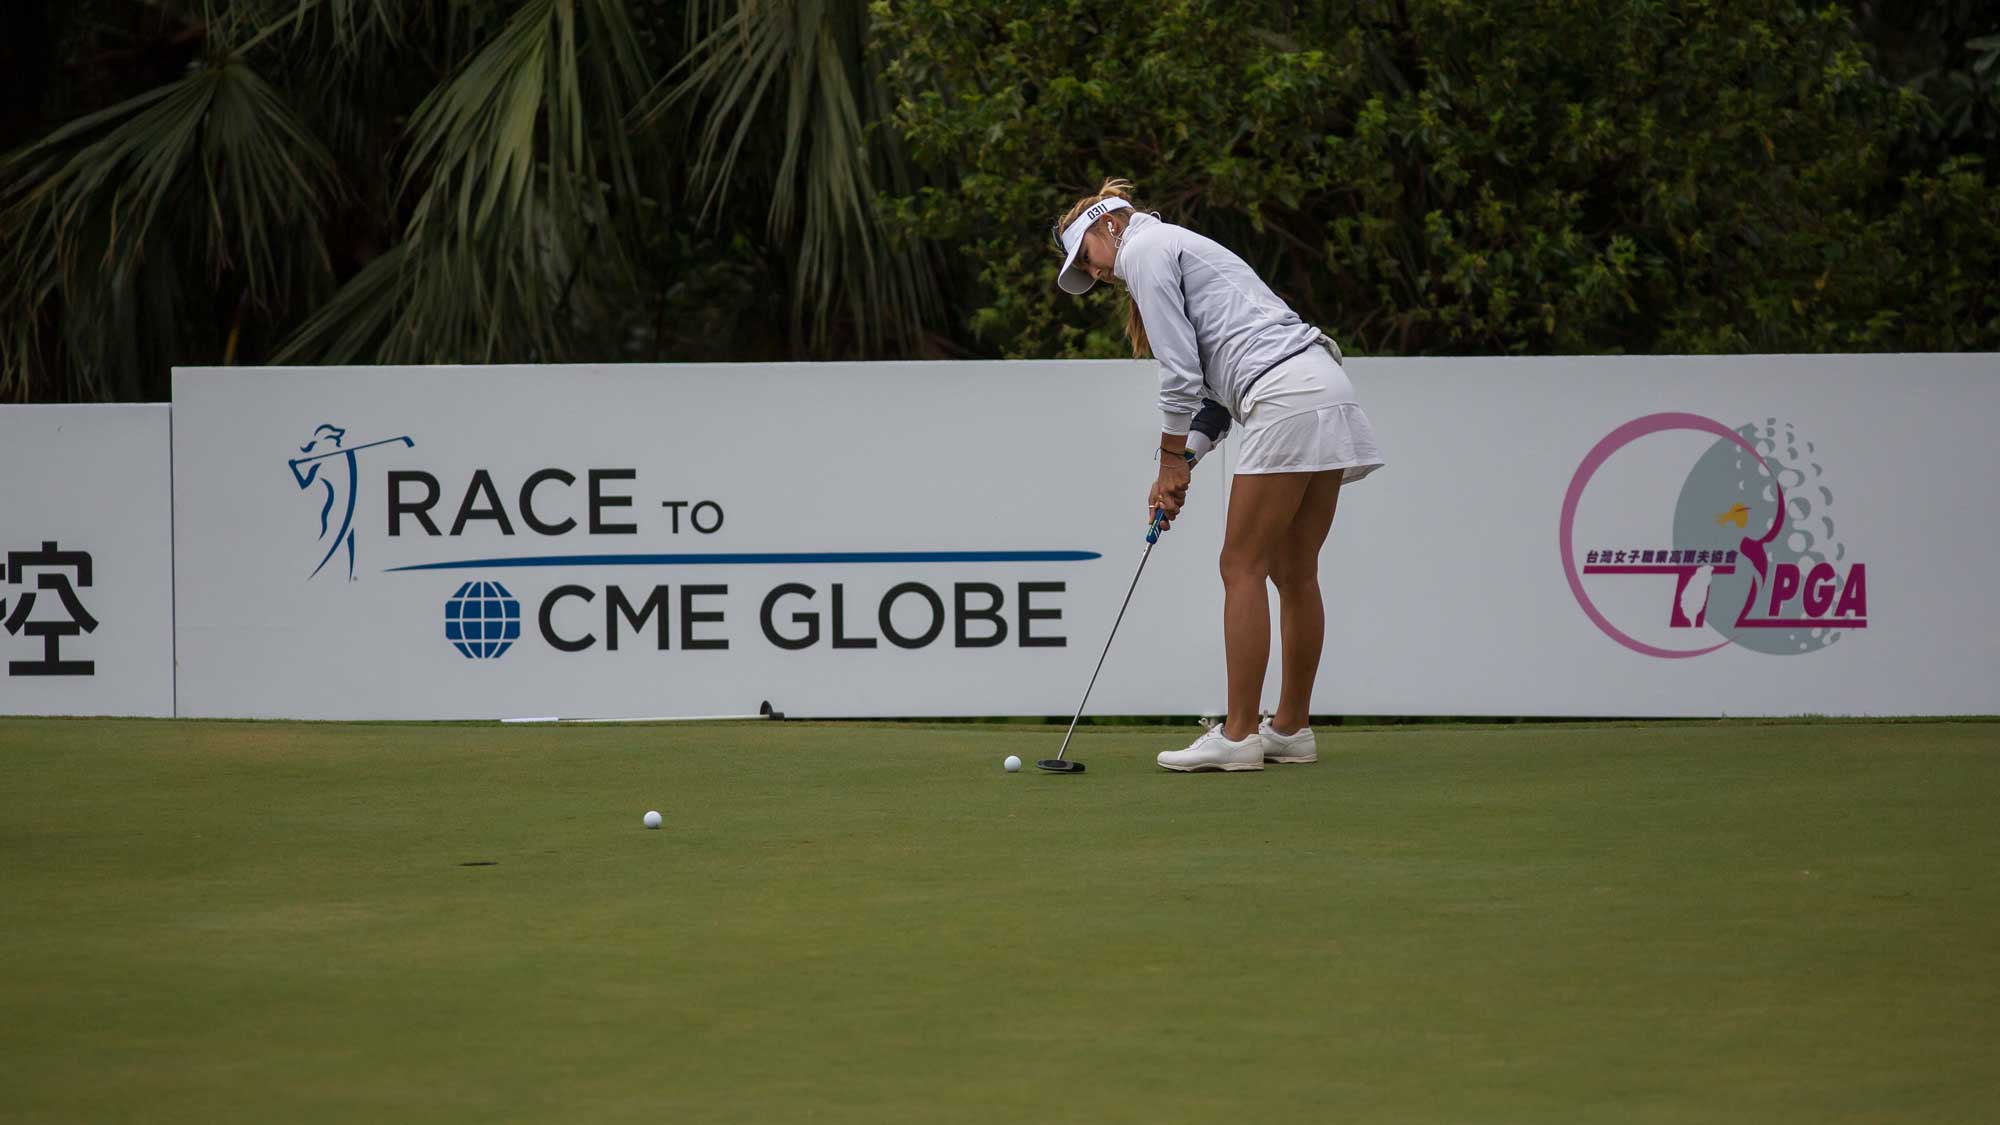 Alison Lee practise before competition in the Fubon Taiwan LPGA Championship